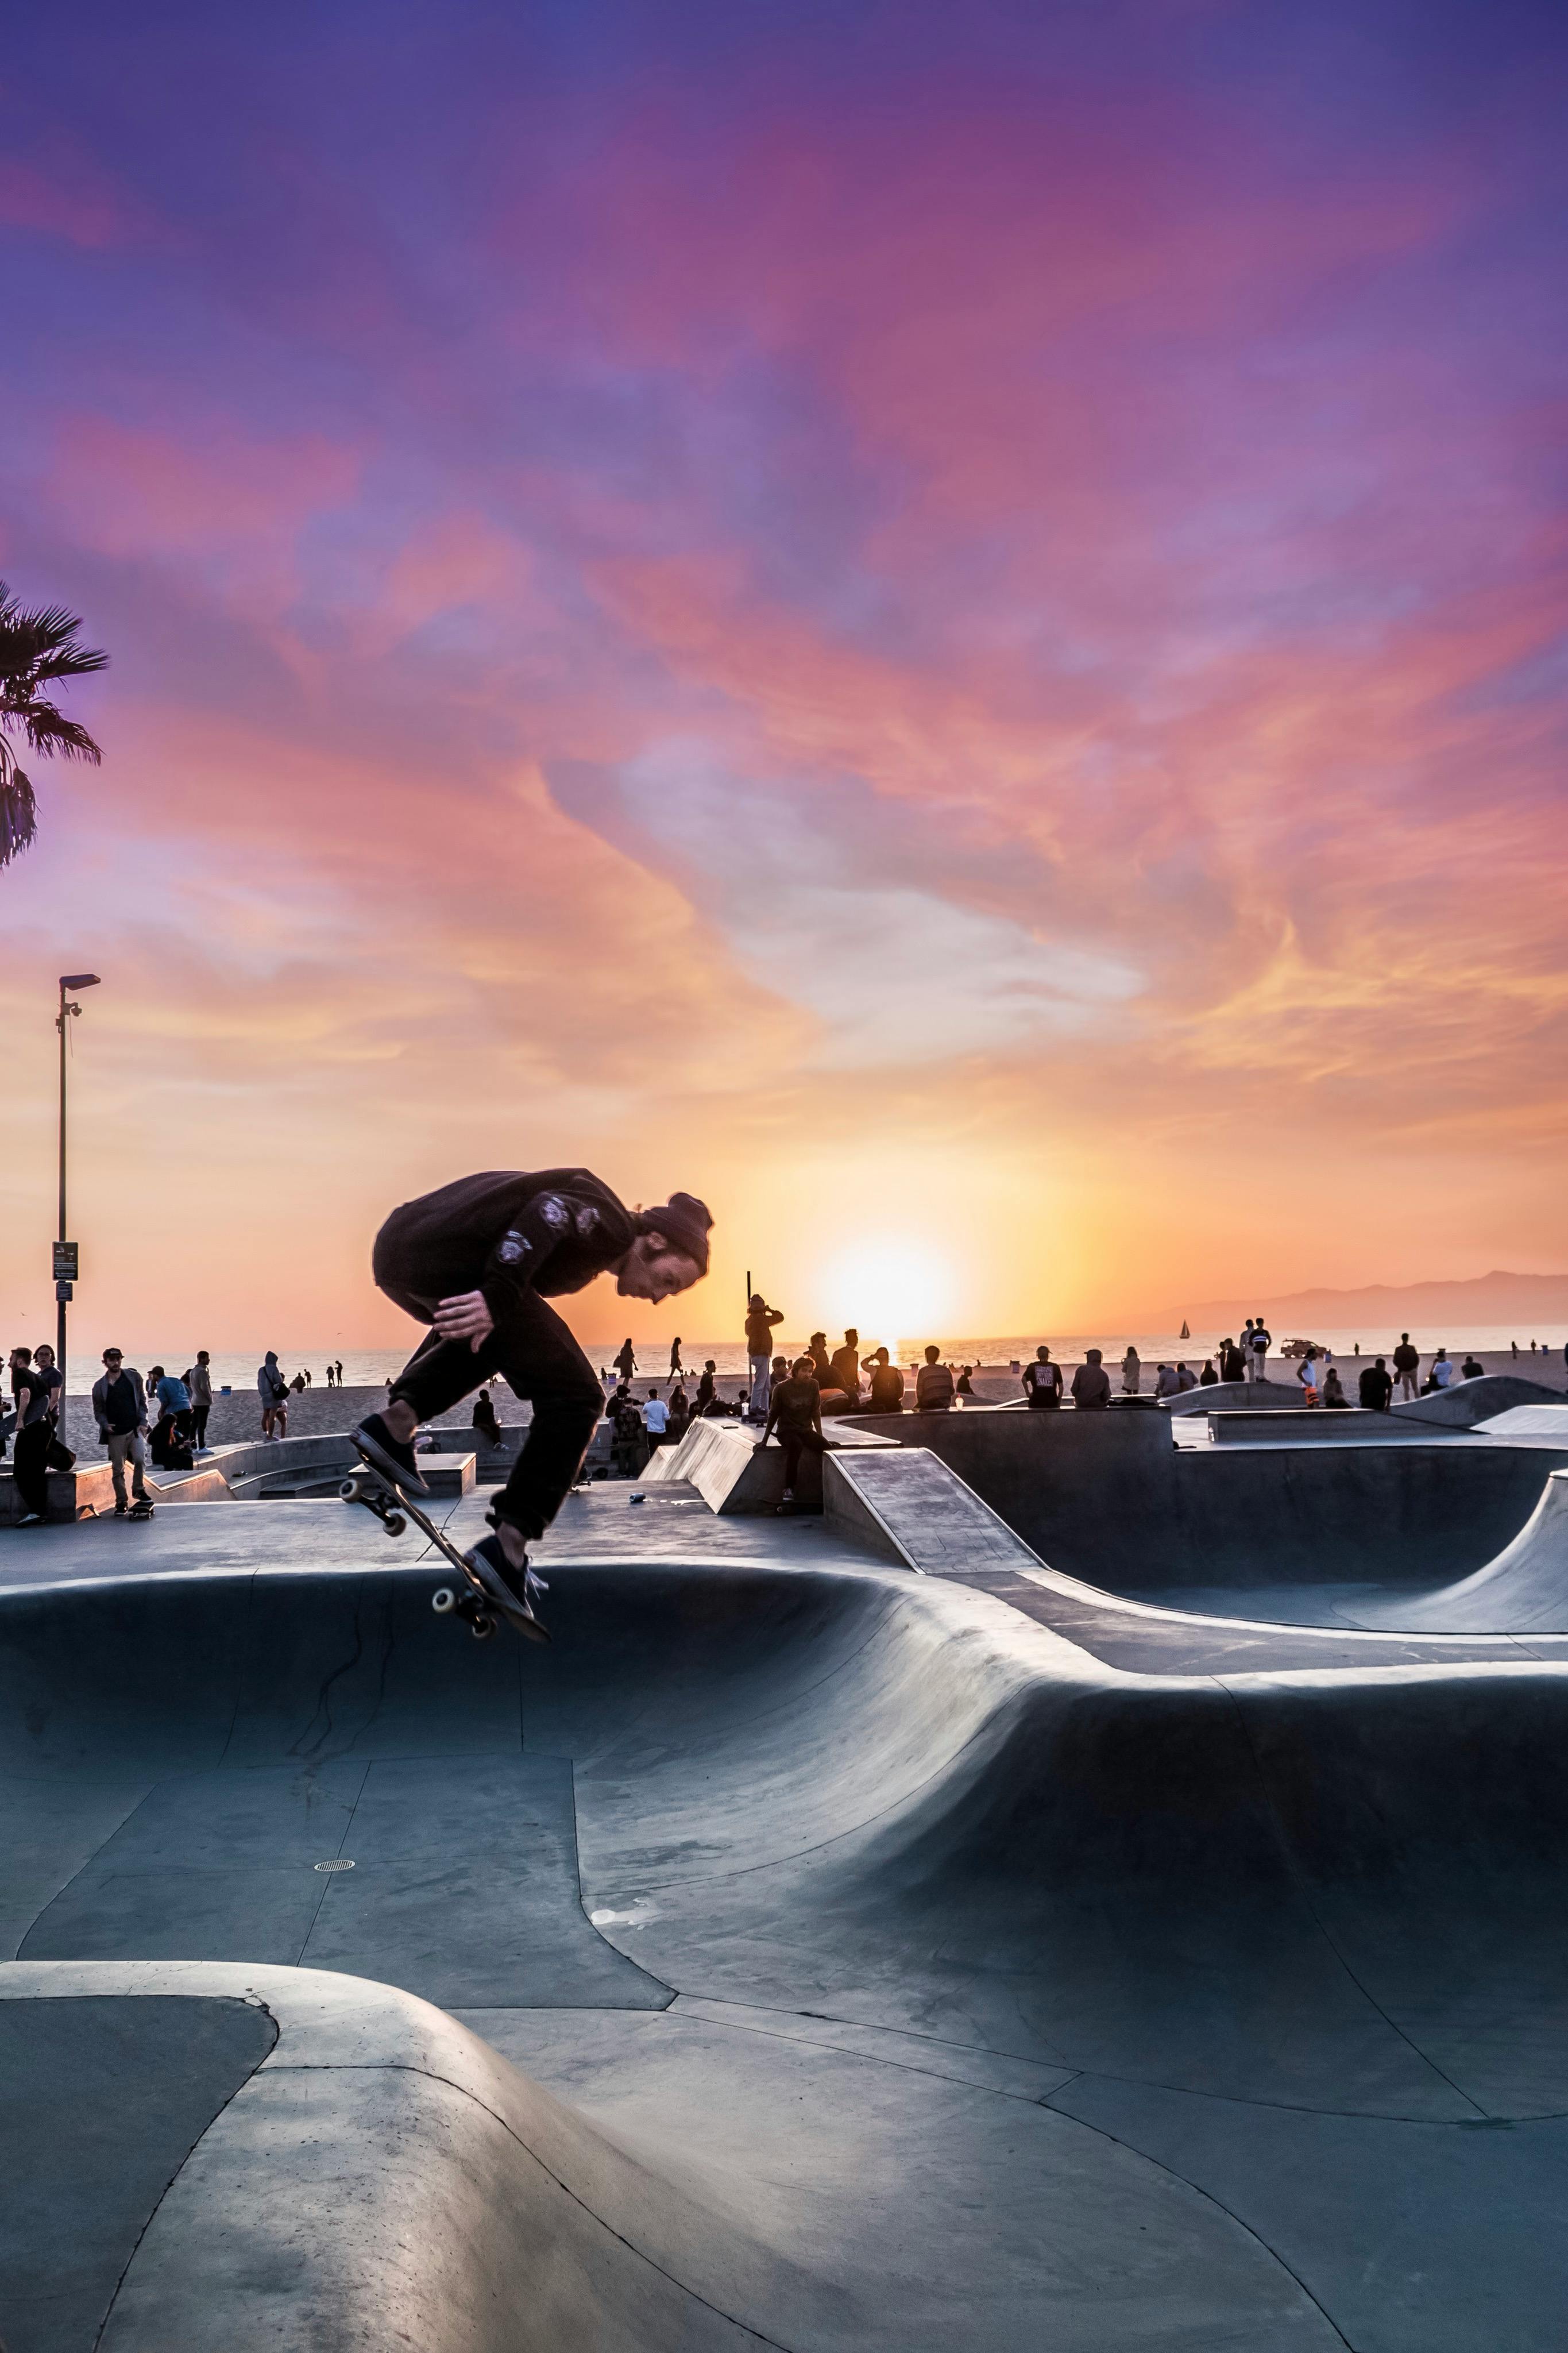 Skateboarding Download BEST Free Stock Photos & HD Images